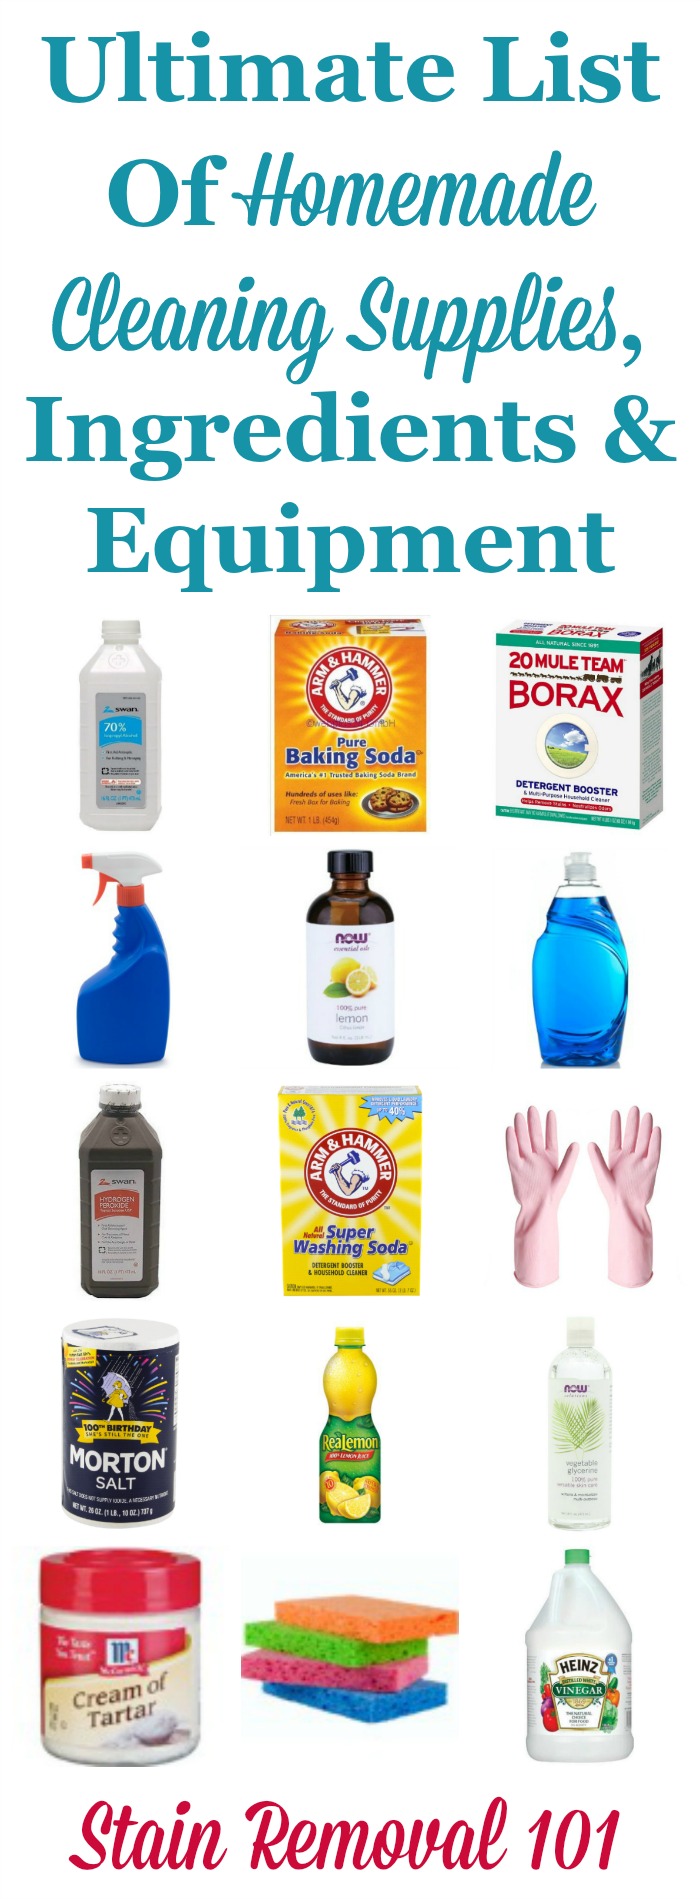 Samples of cleaning products